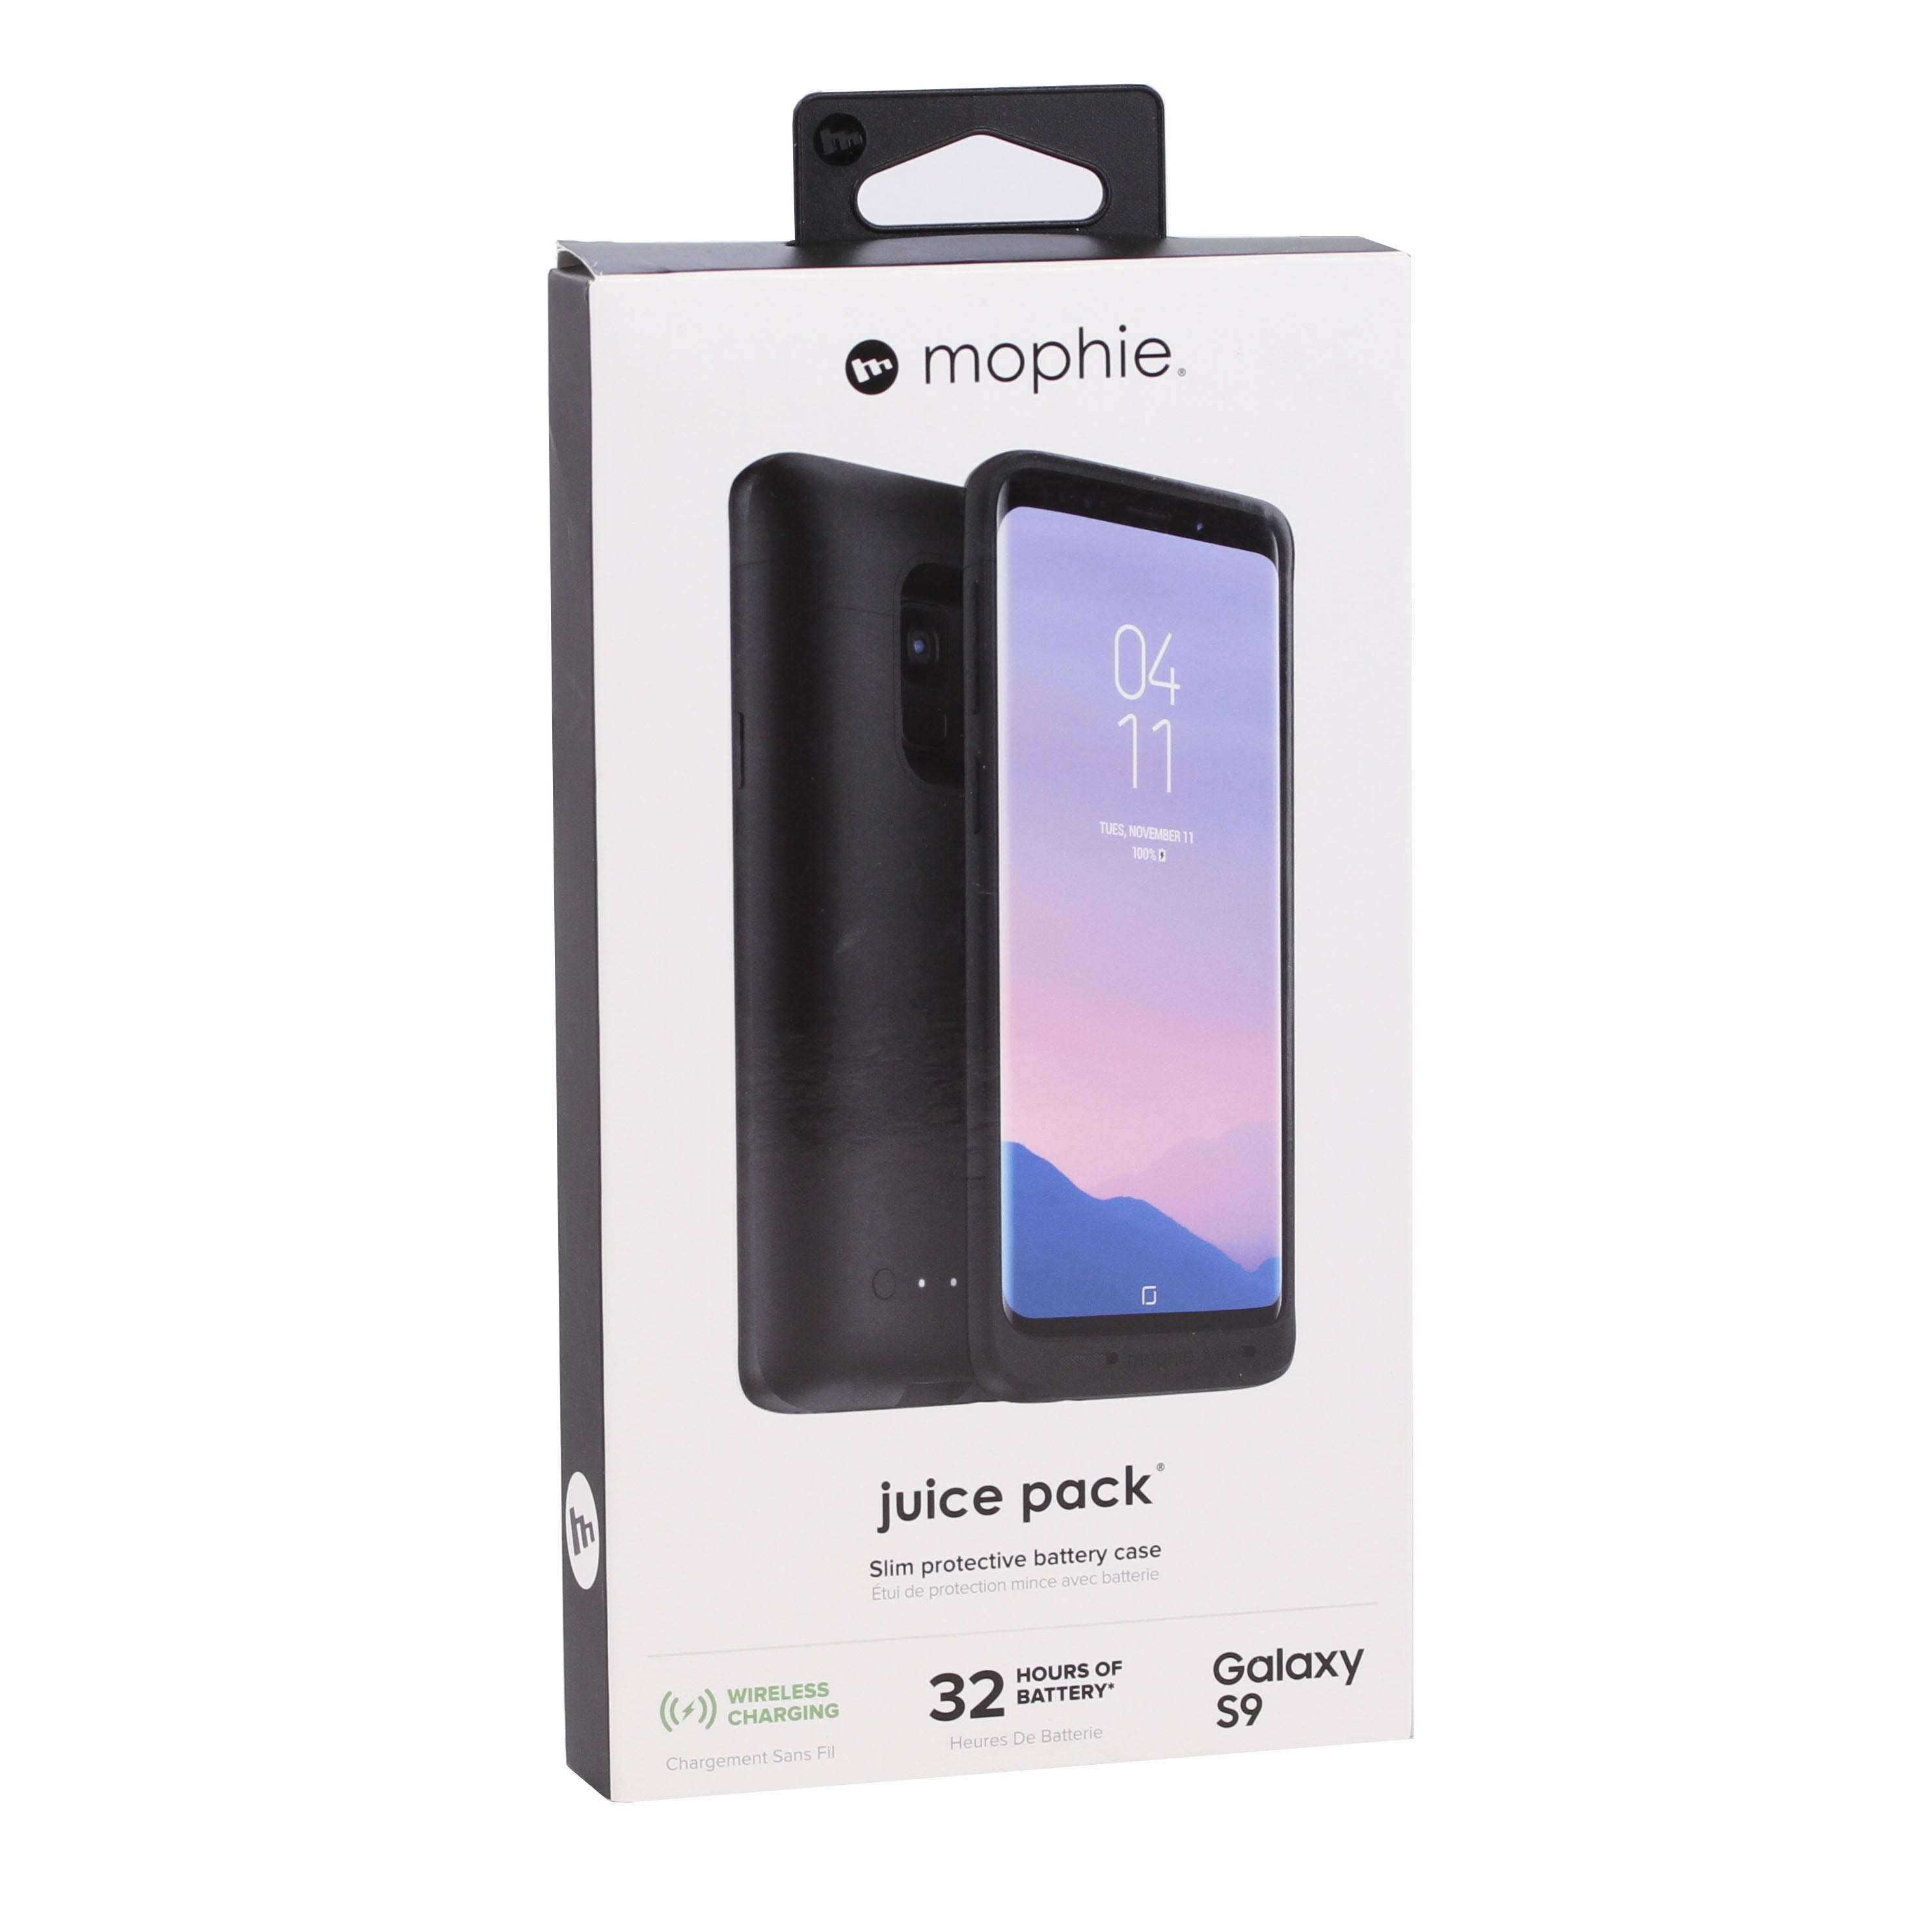 Mophie Juice Pack Qi Wireless Charging Battery Case for Galaxy S9 - Black